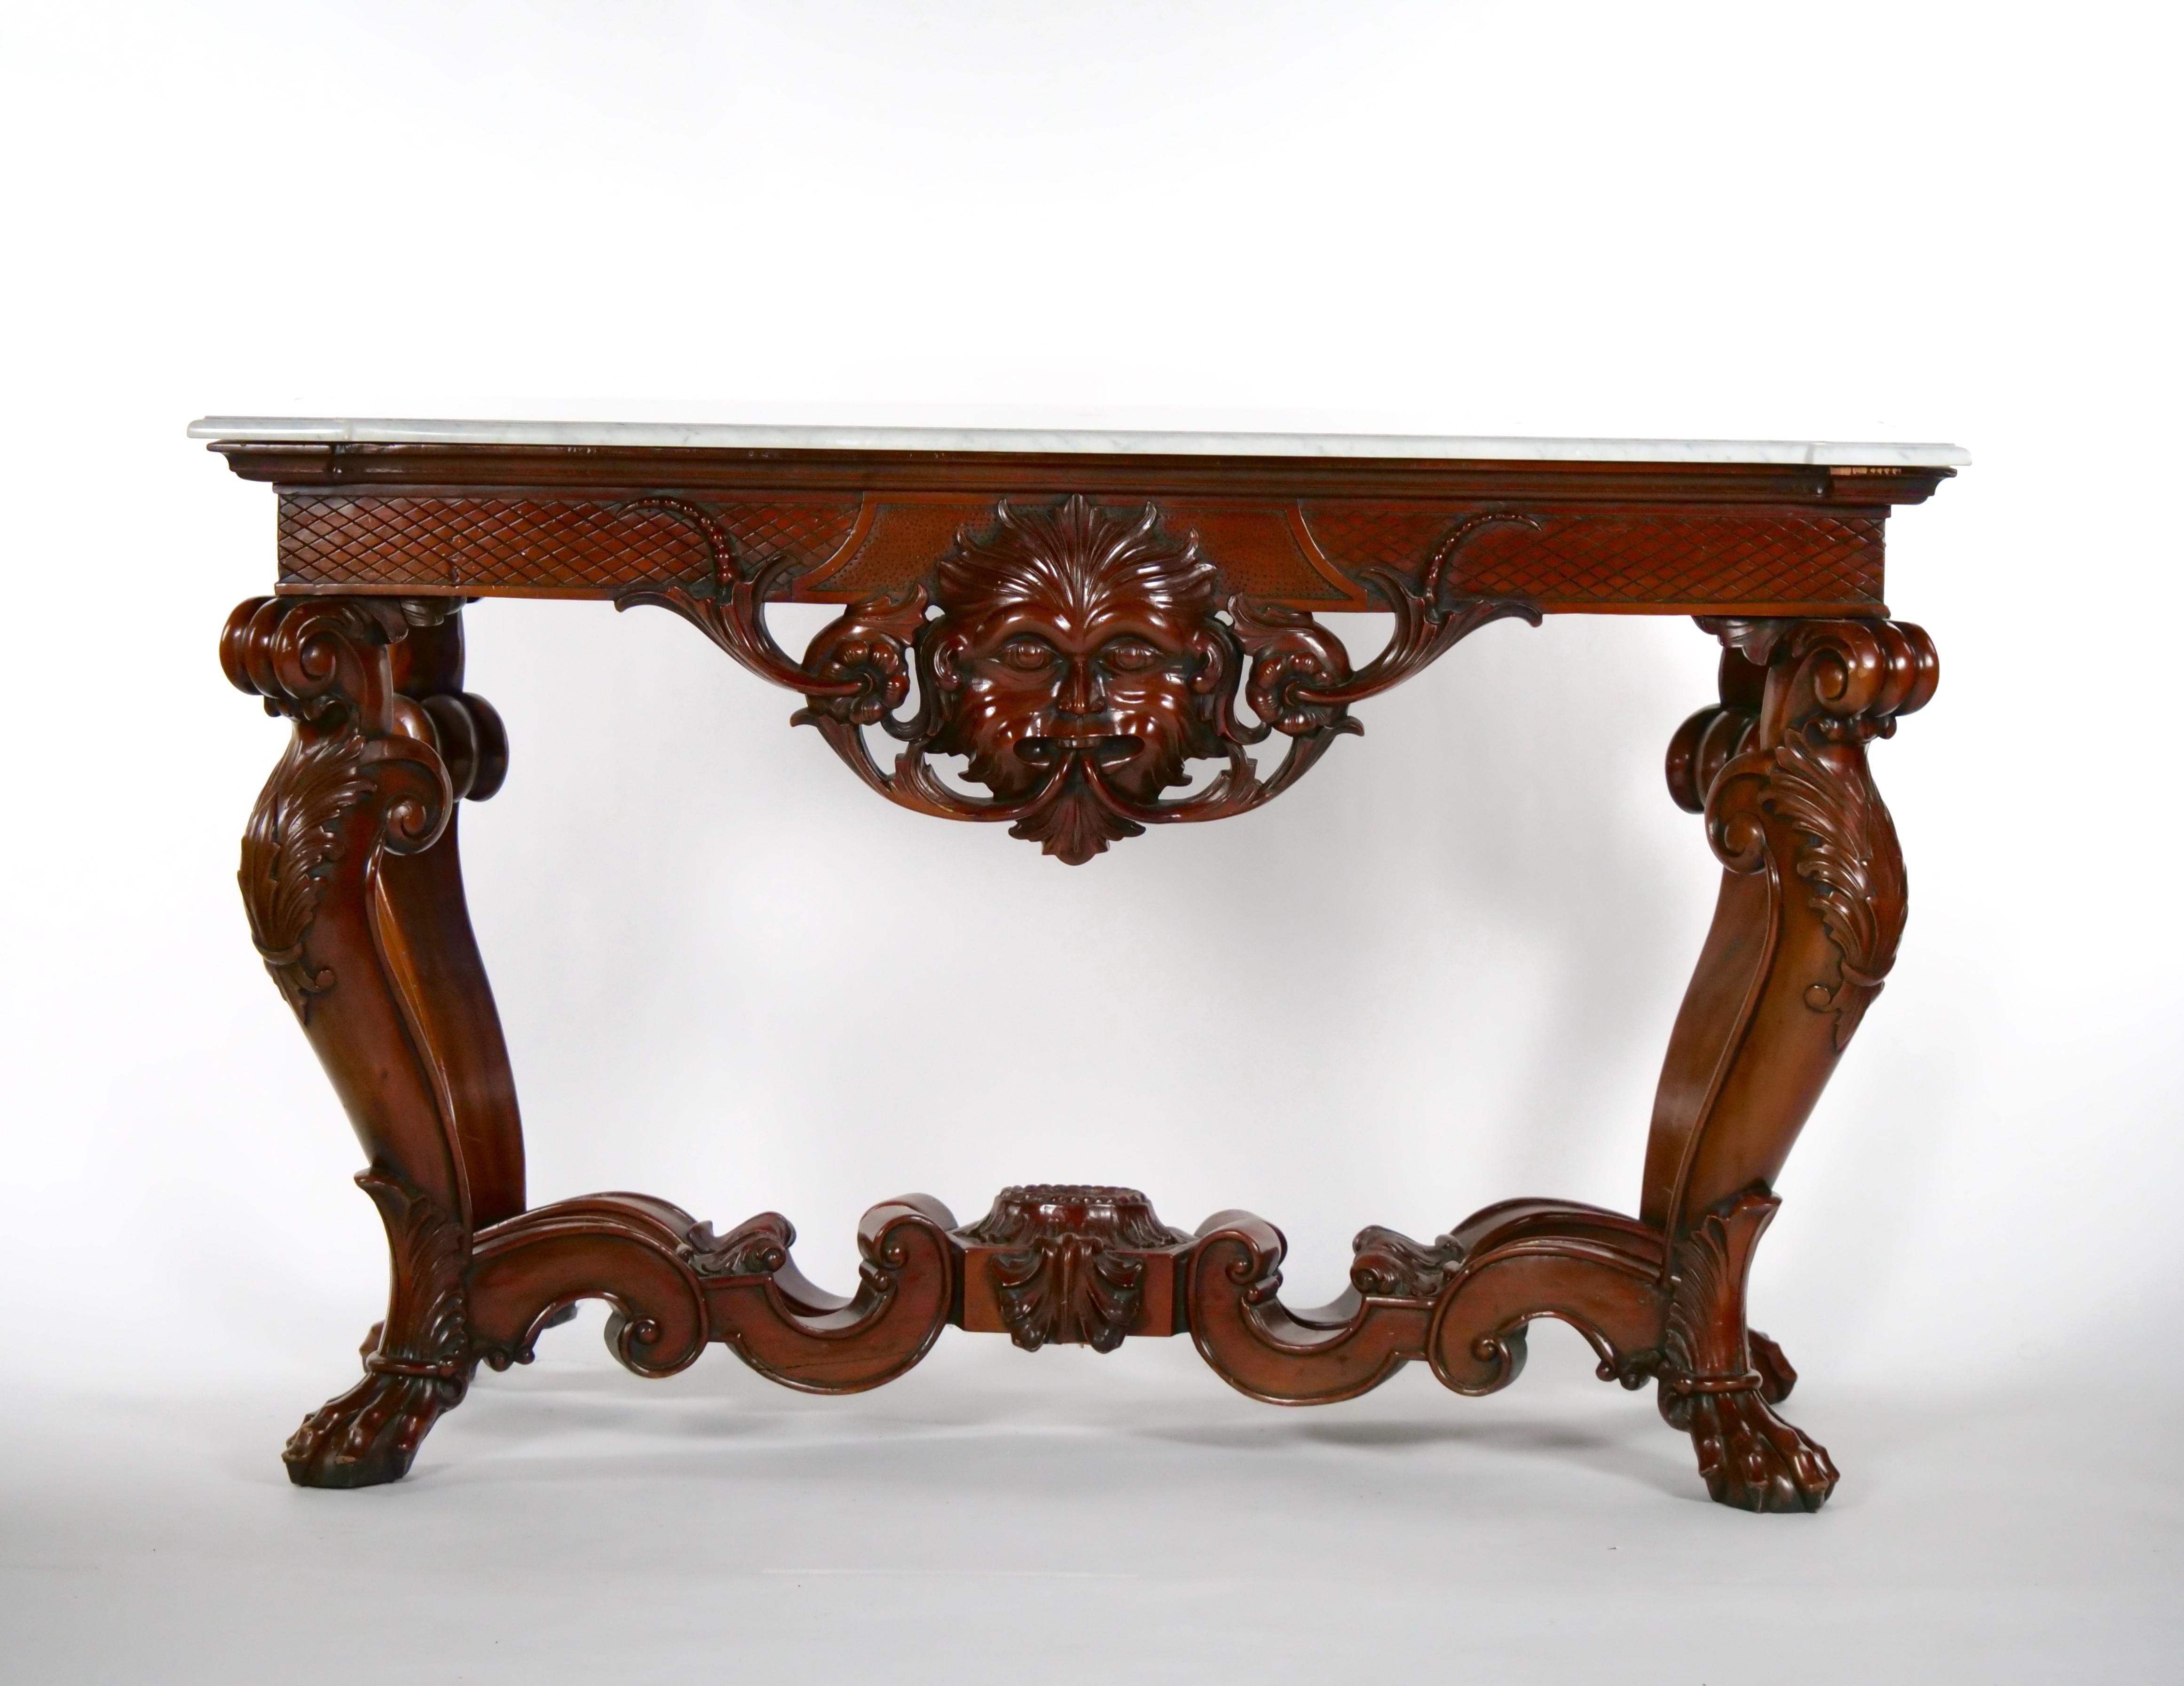 19th century hand carved mahogany wood Rococo style foyer, console table or sofa table. The foyer / console table is made of solid mahogany wood with heavily hand carved decoration. The table features a front carved mythology figure. The serpentine